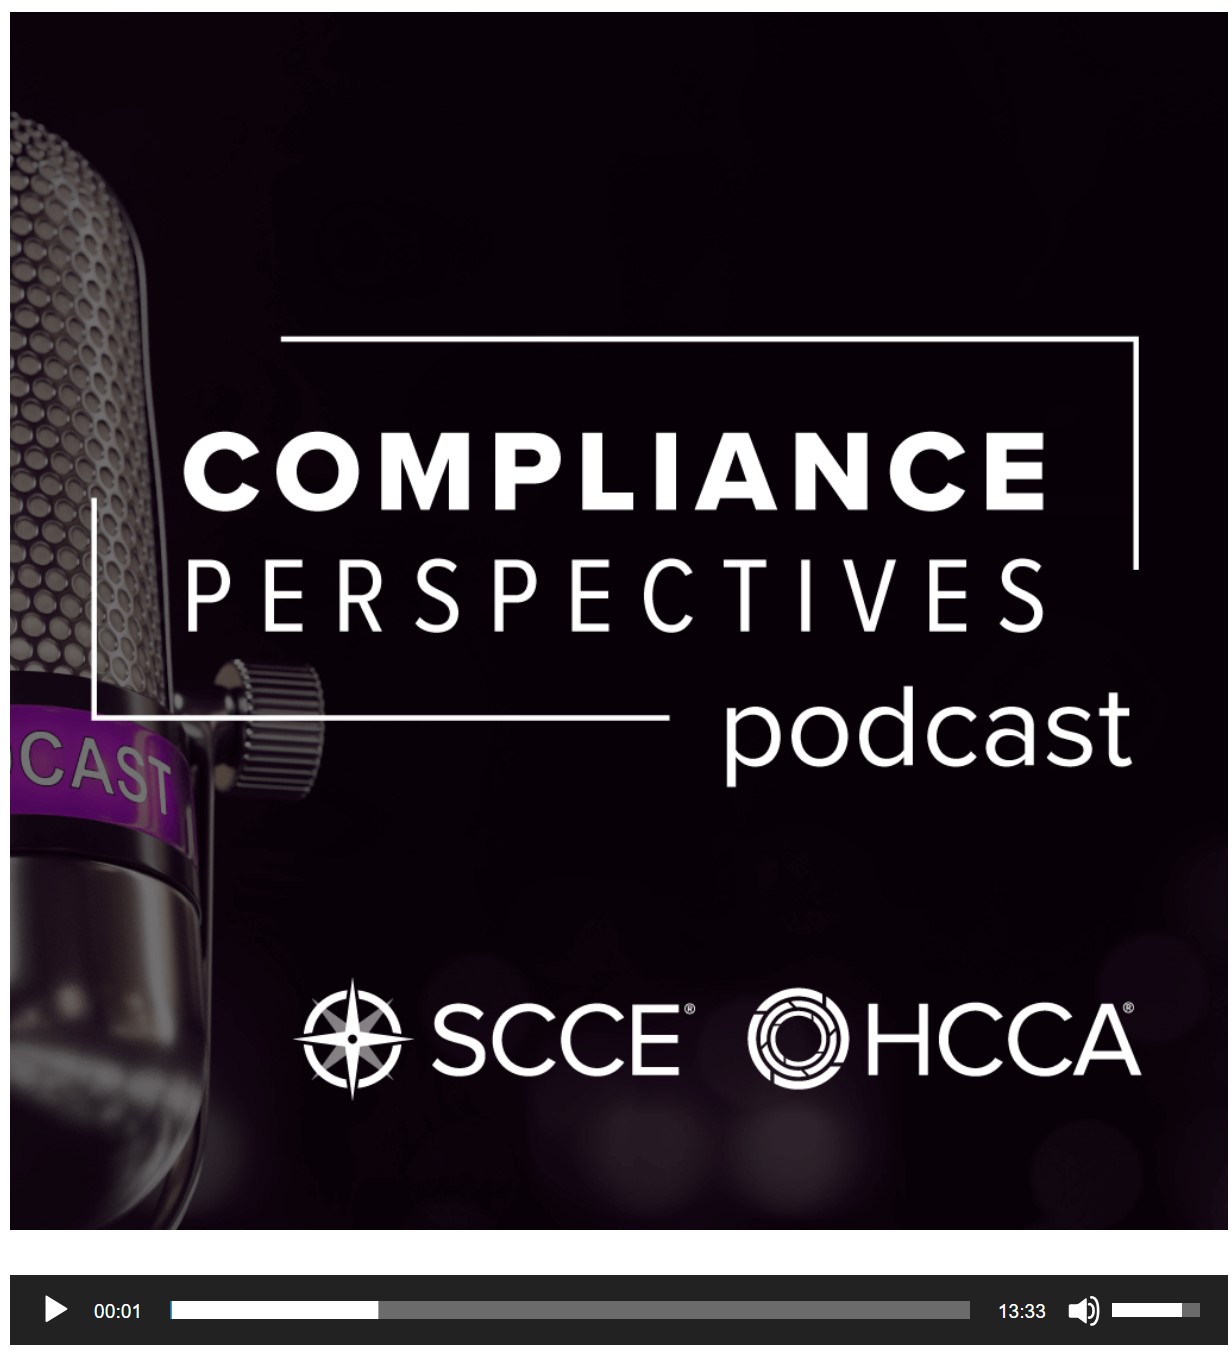 Podcast: SCCE & HCCA Compliance Perspectives Podcast: David Paschall and Stephanie Haywood on Contract Lifecycle Management